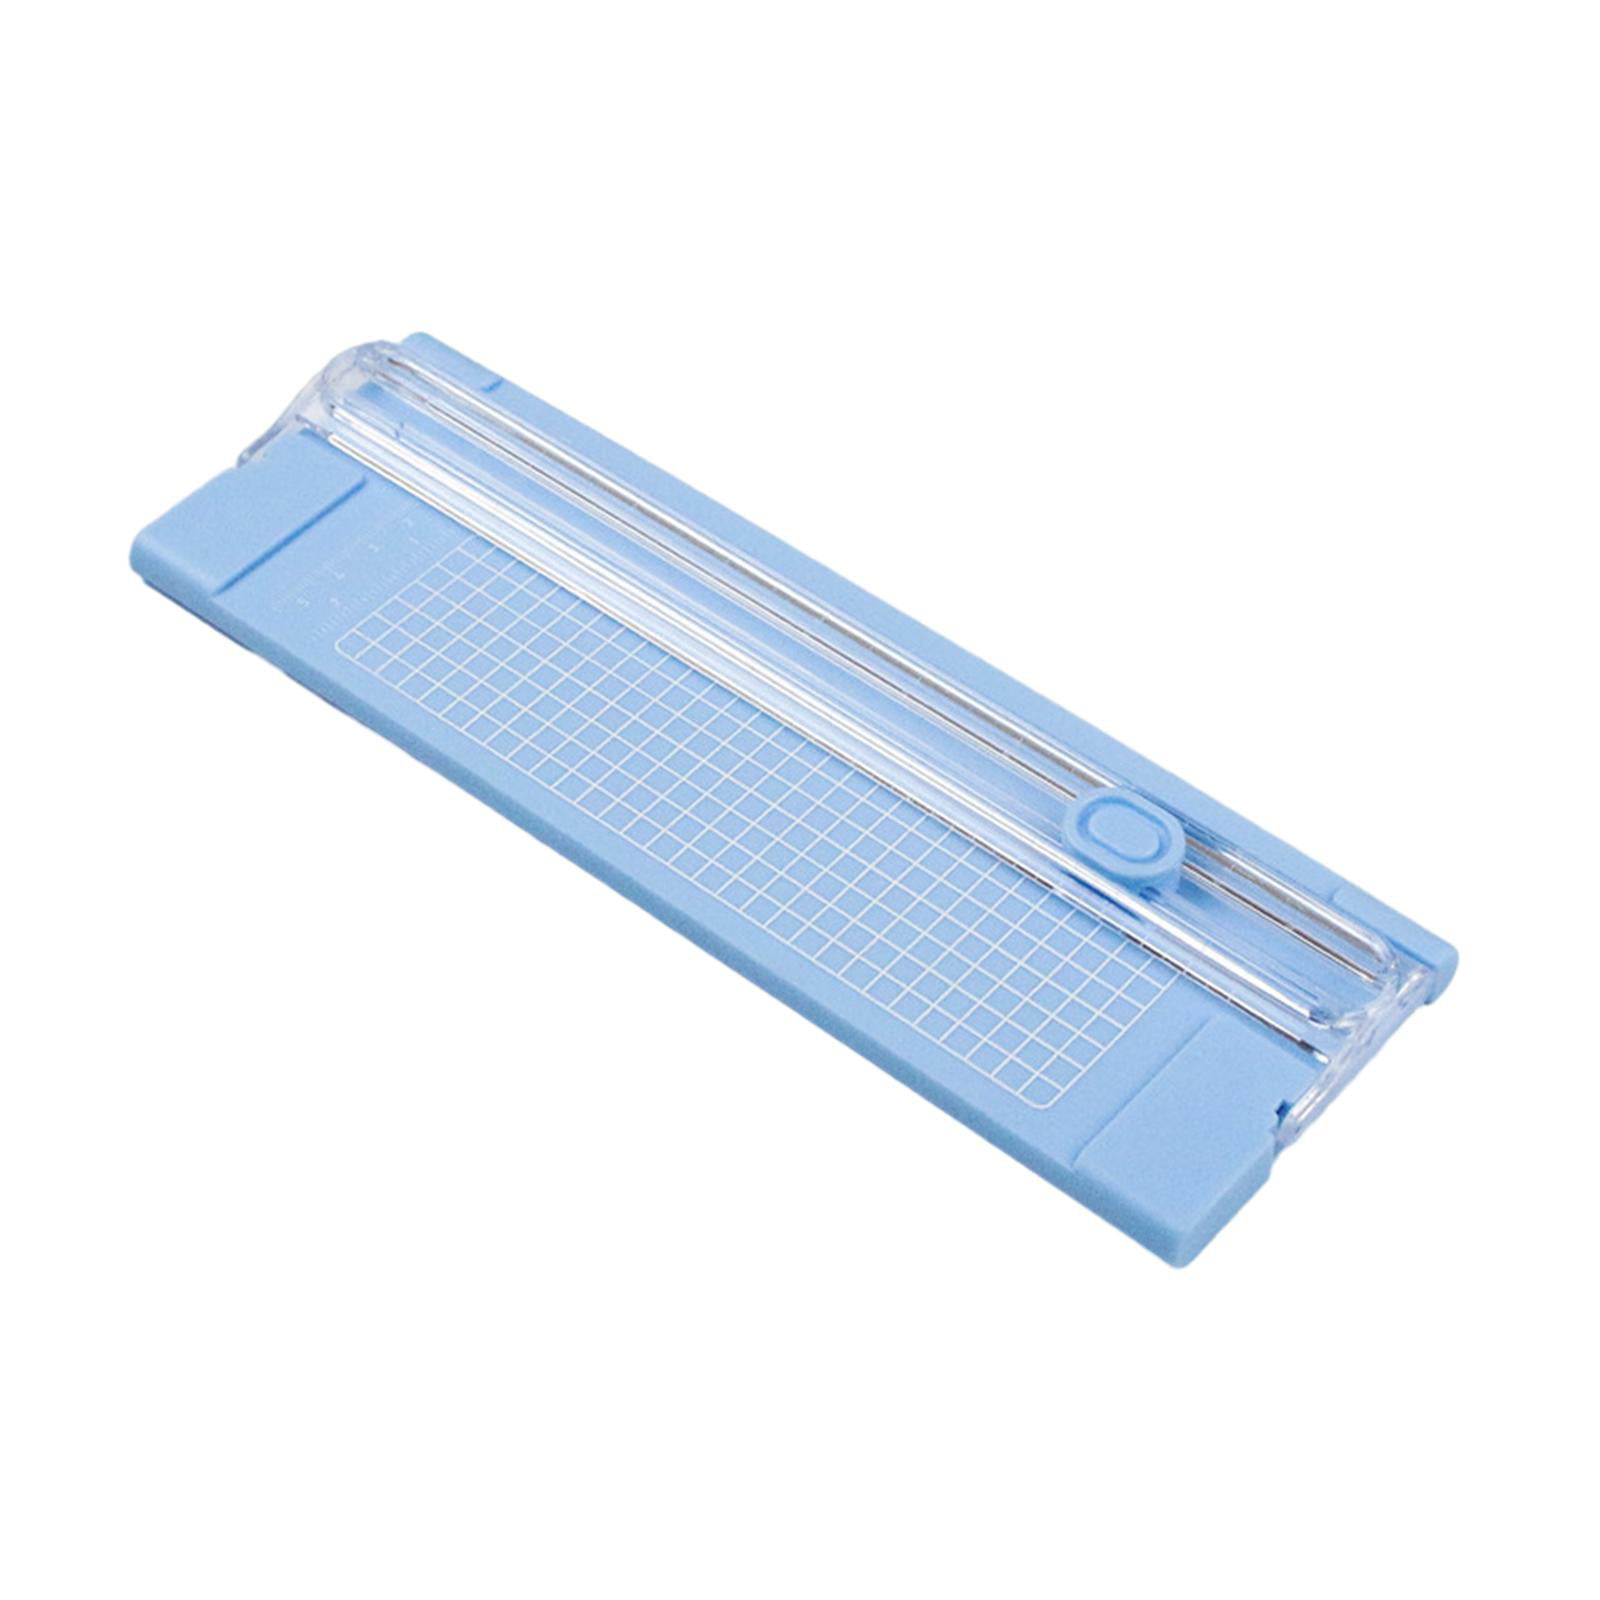 Small Paper Cutter: Perfect for Office, Arts & Crafts, and DIY Projects